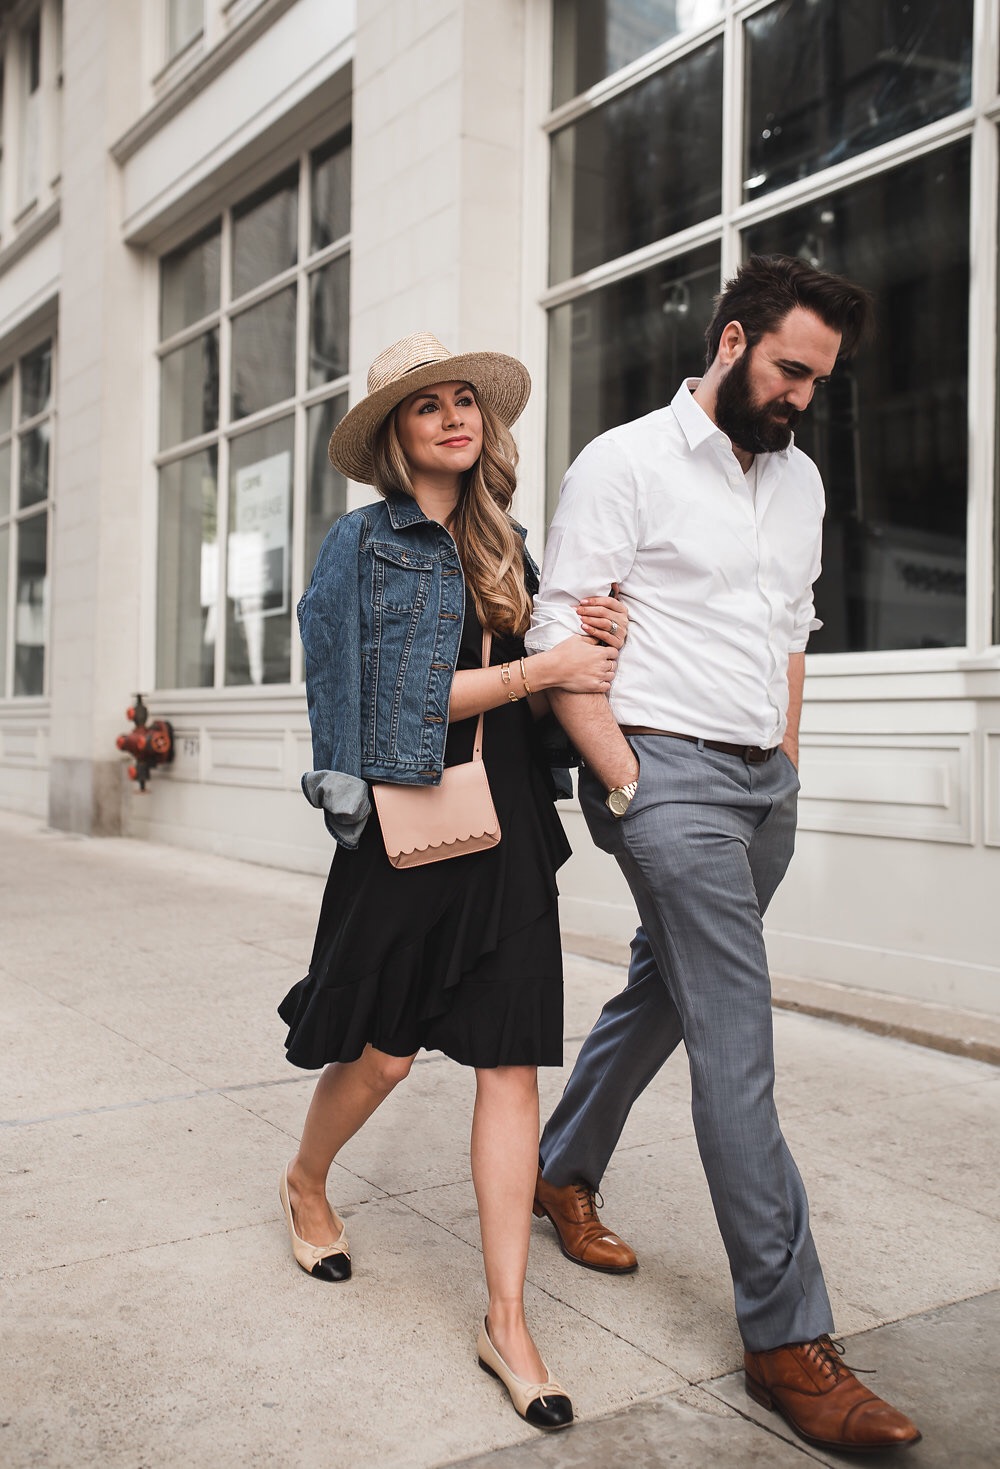 Spring Outfits For Him + Her | The Teacher Diva: a Dallas Fashion Blog  featuring Beauty & Lifestyle